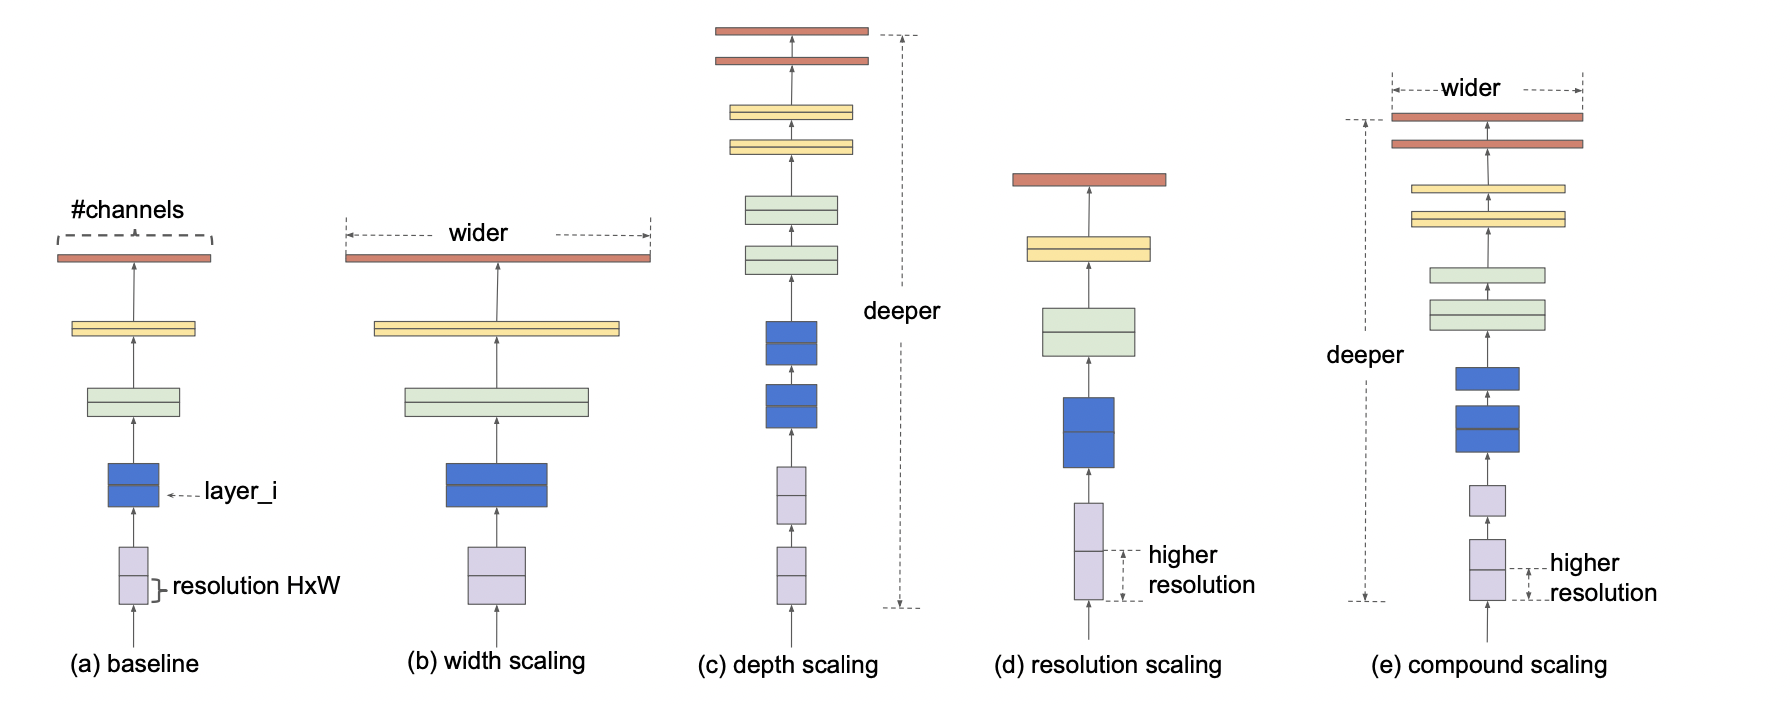 Model scaling (M. Tan and Le 2019b).